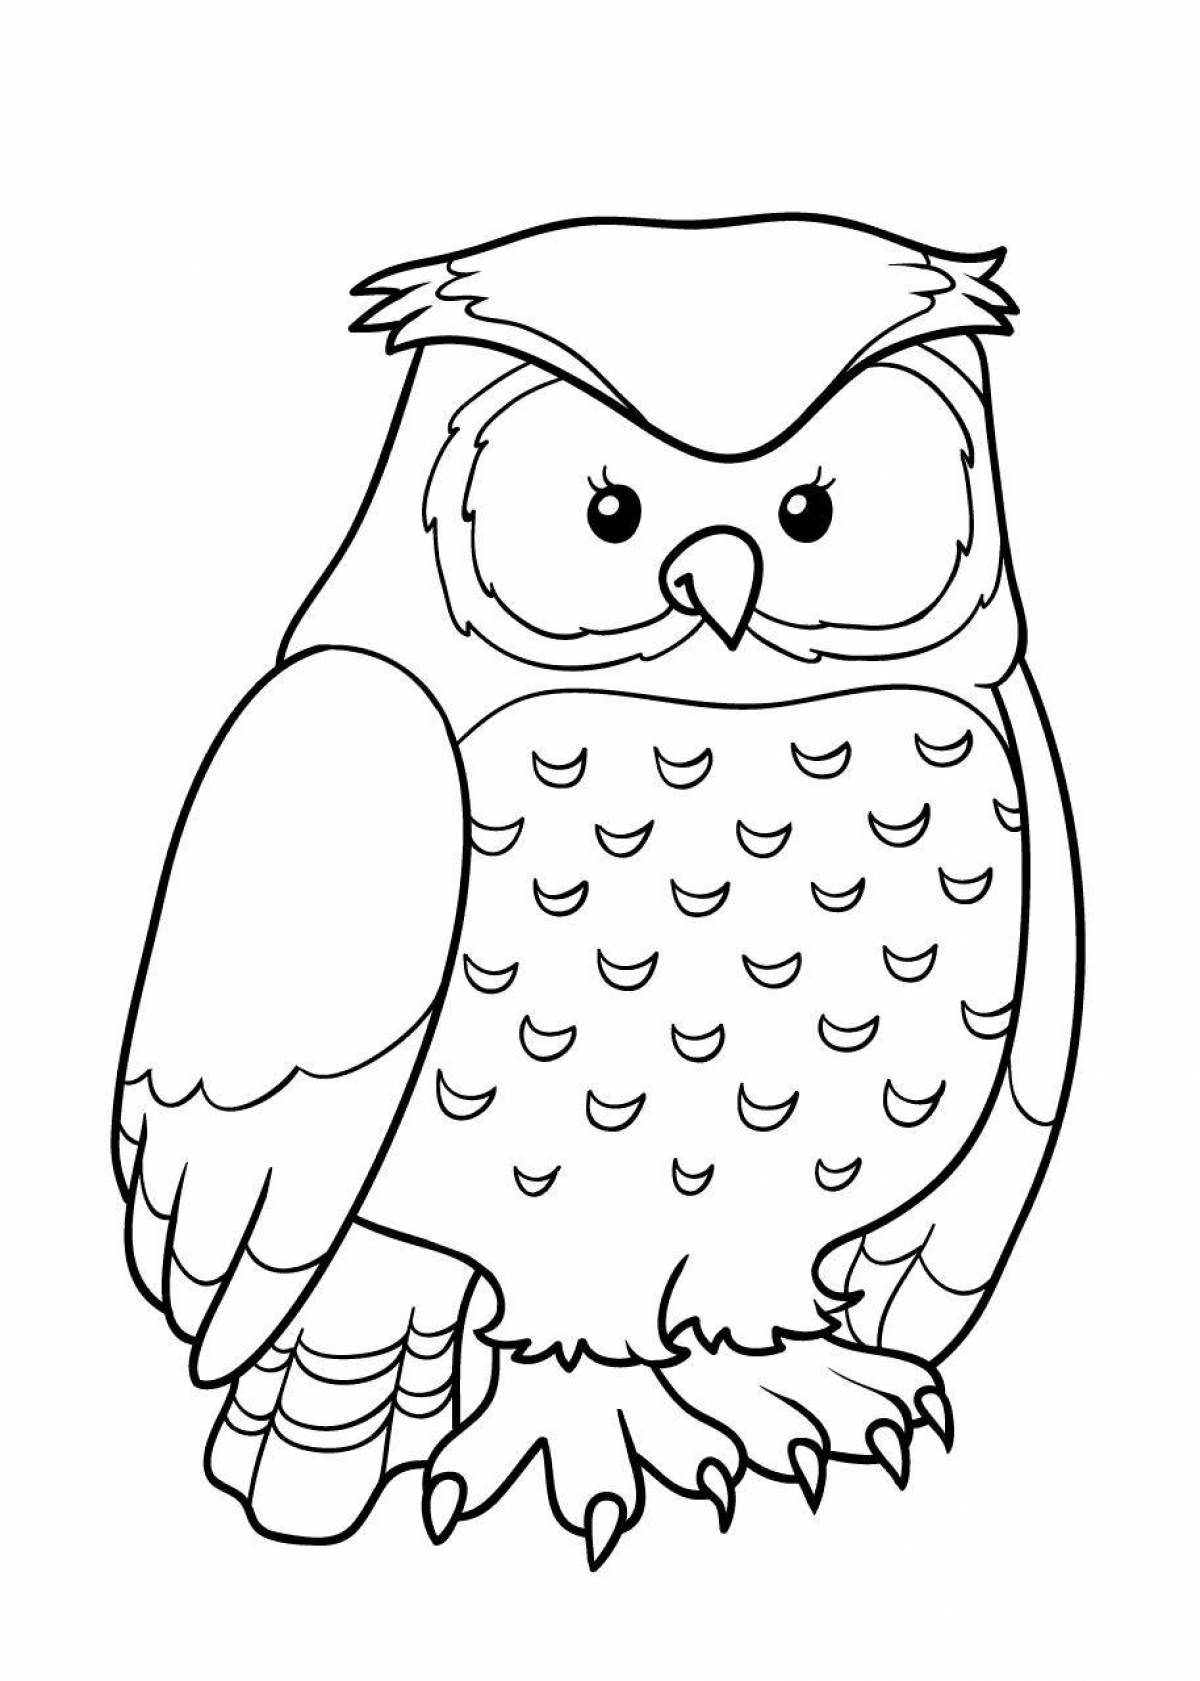 Bianca owl live coloring